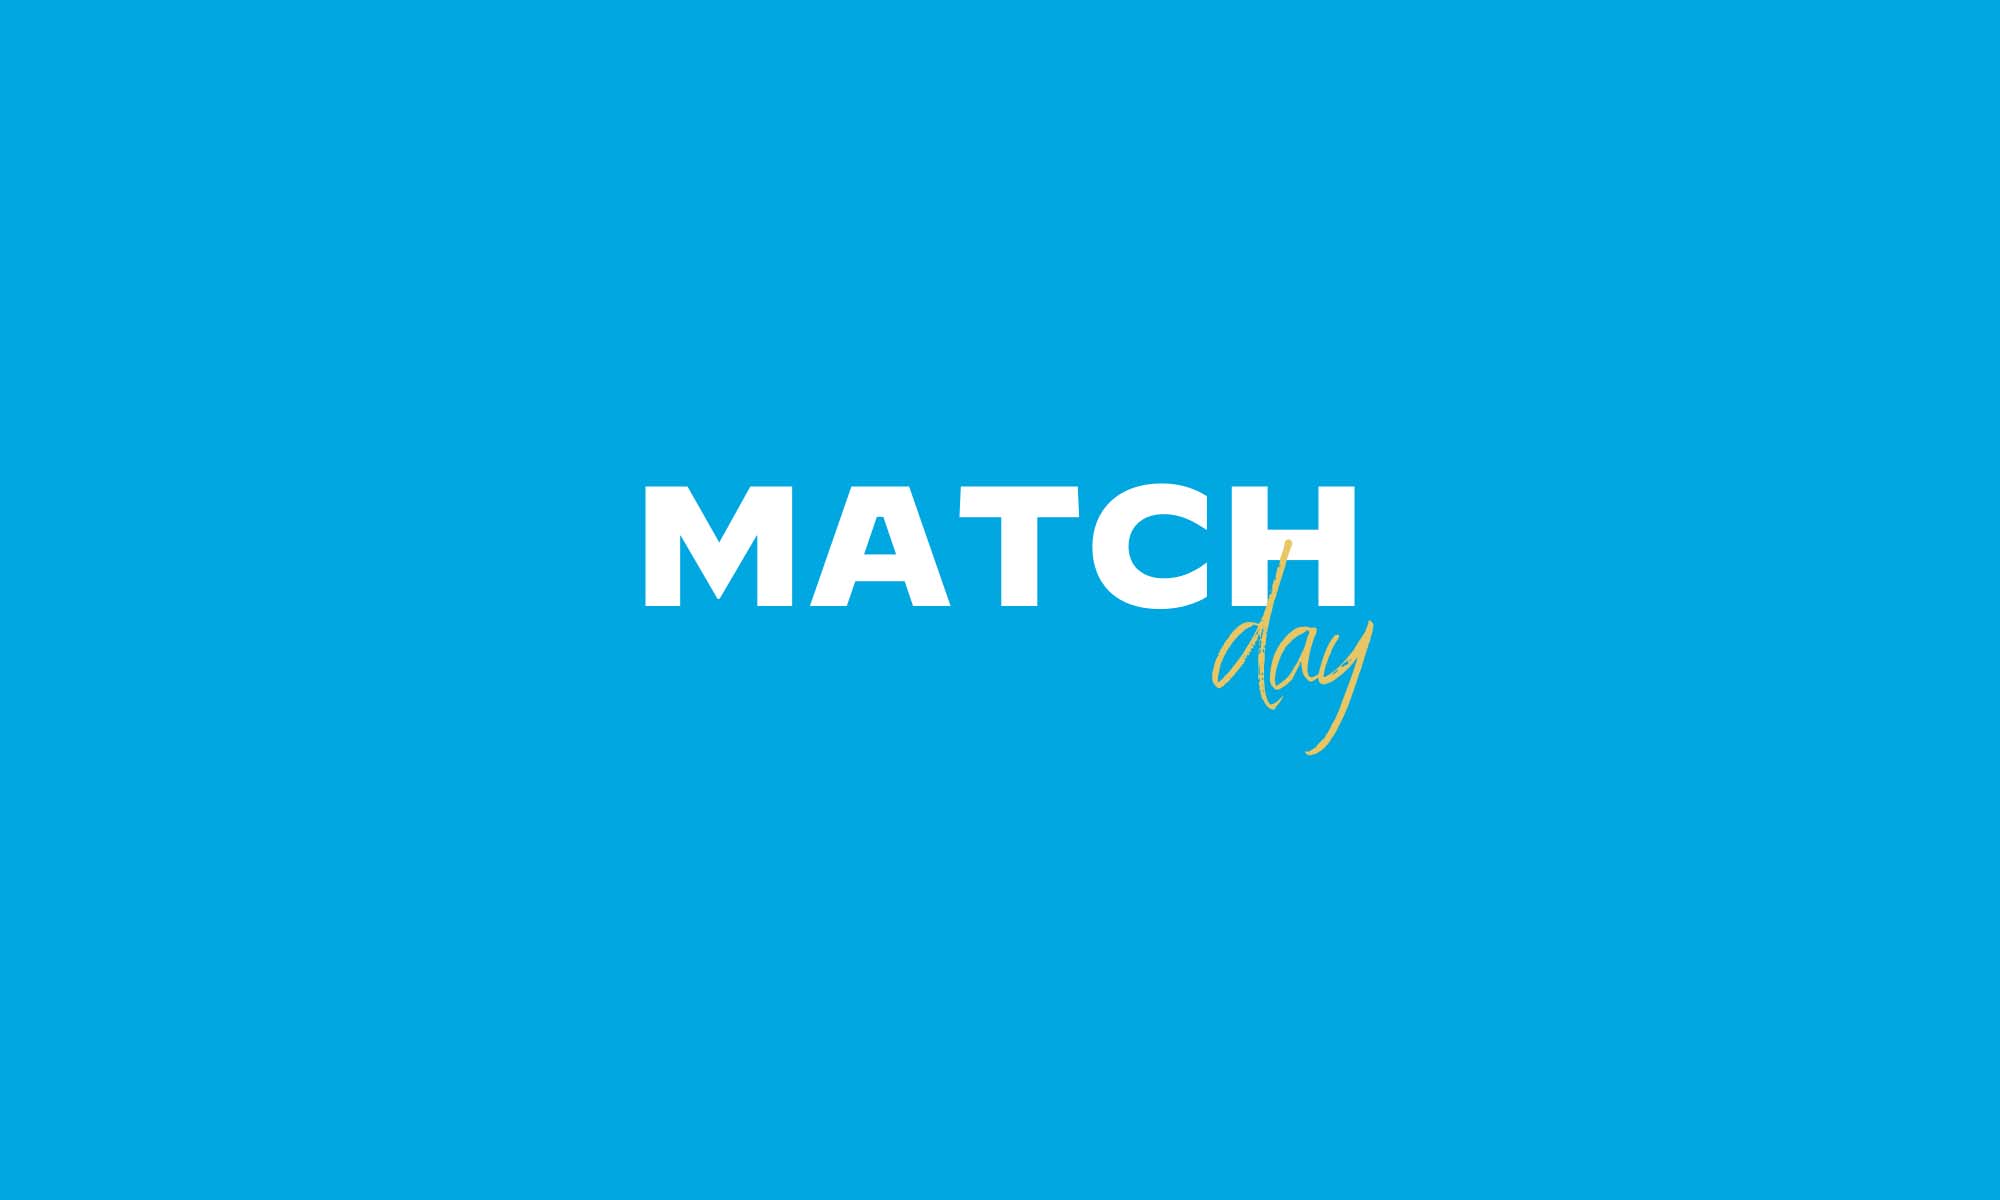 From our radiologists: What to keep in mind on Match Day